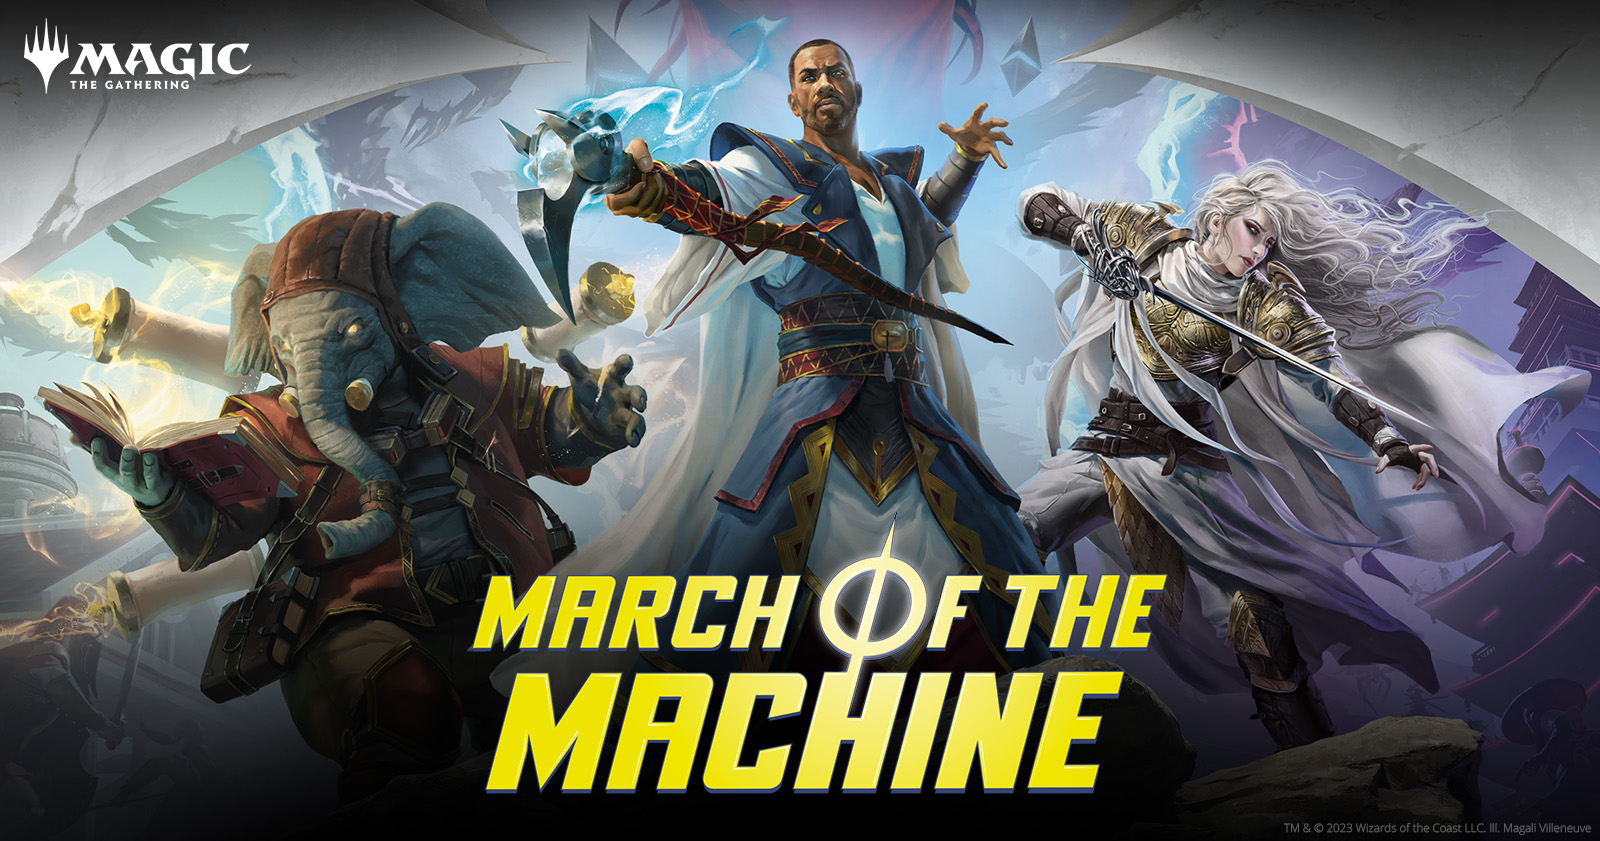 Three planeswalkers from Magic: The Gathering stand in a pose in front of the March of the Machine logo.